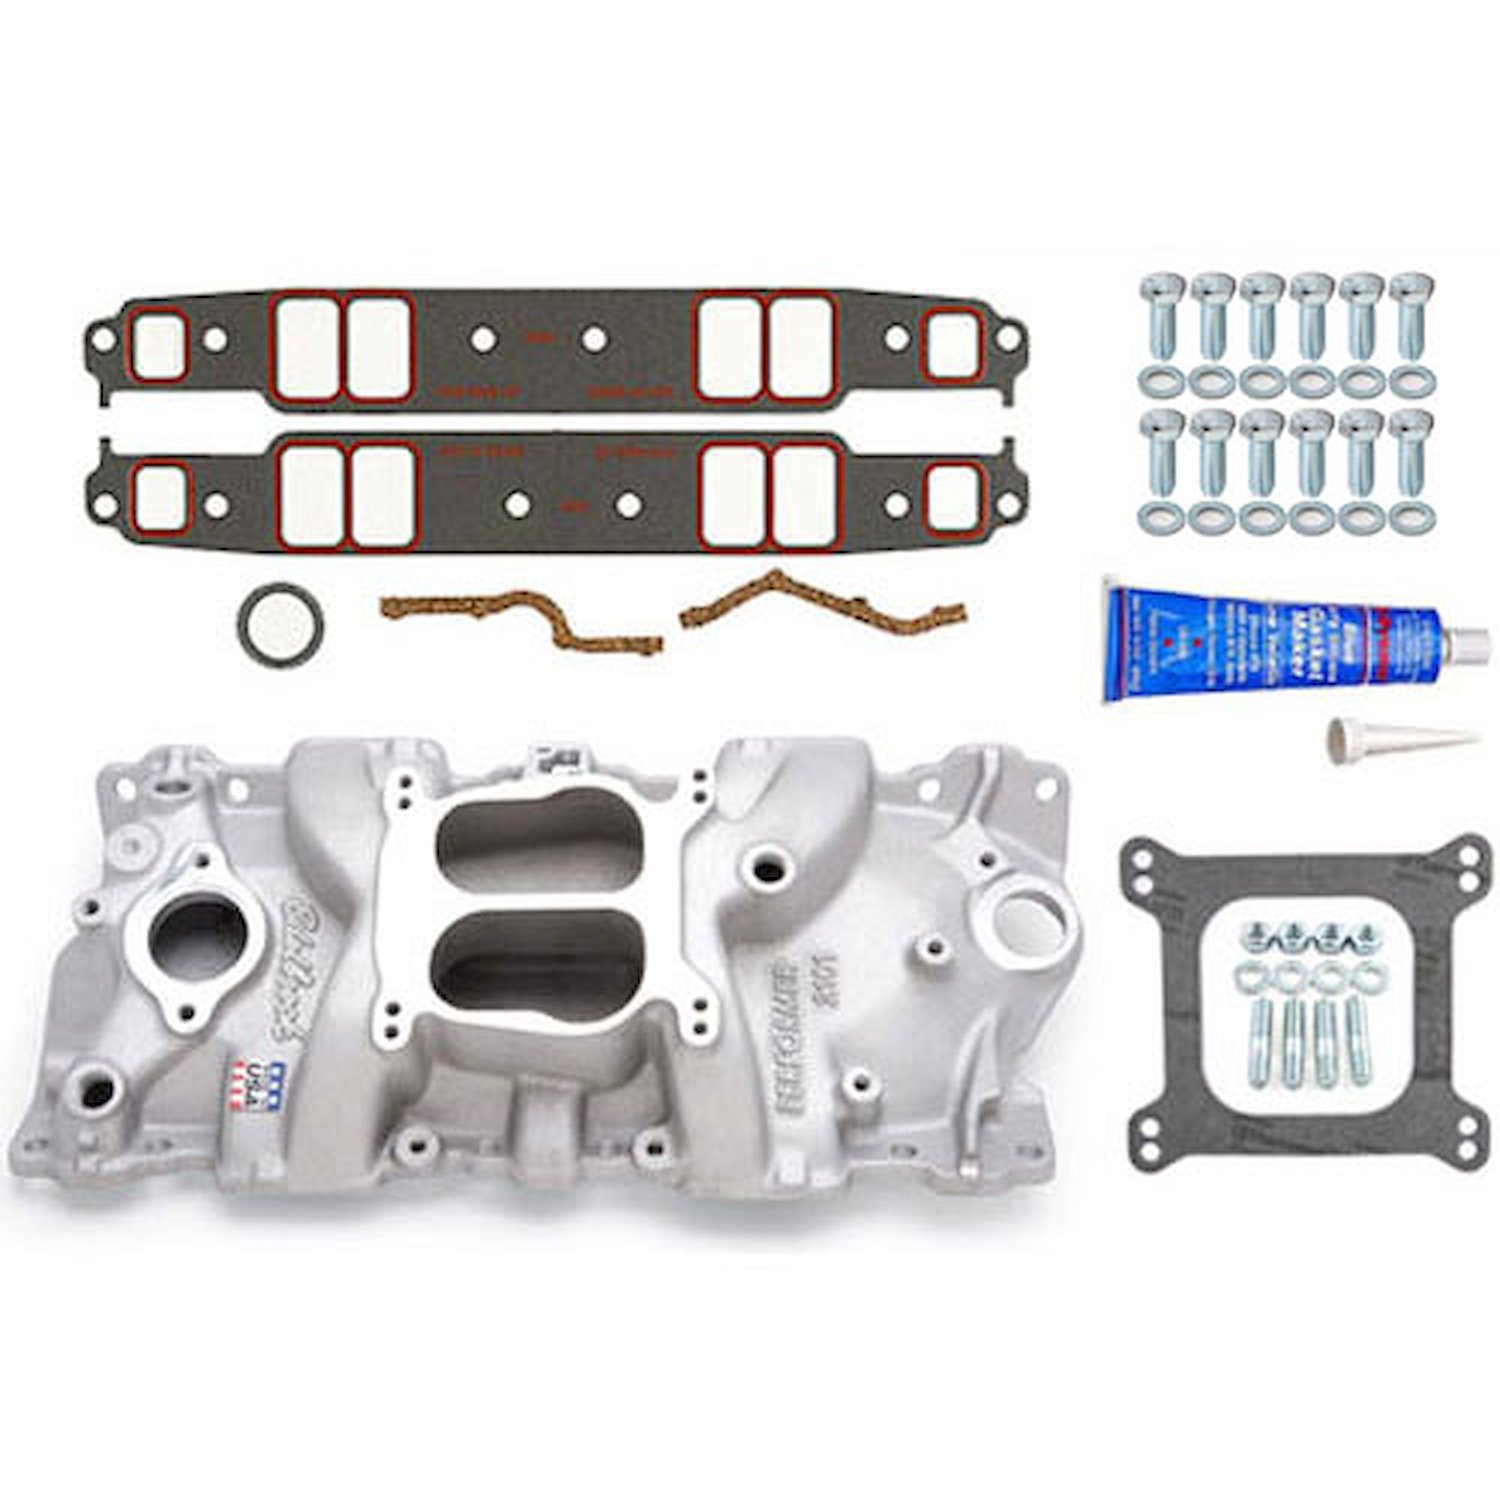 Performer Intake Manifold for Small Block Chevy with Installation Kit